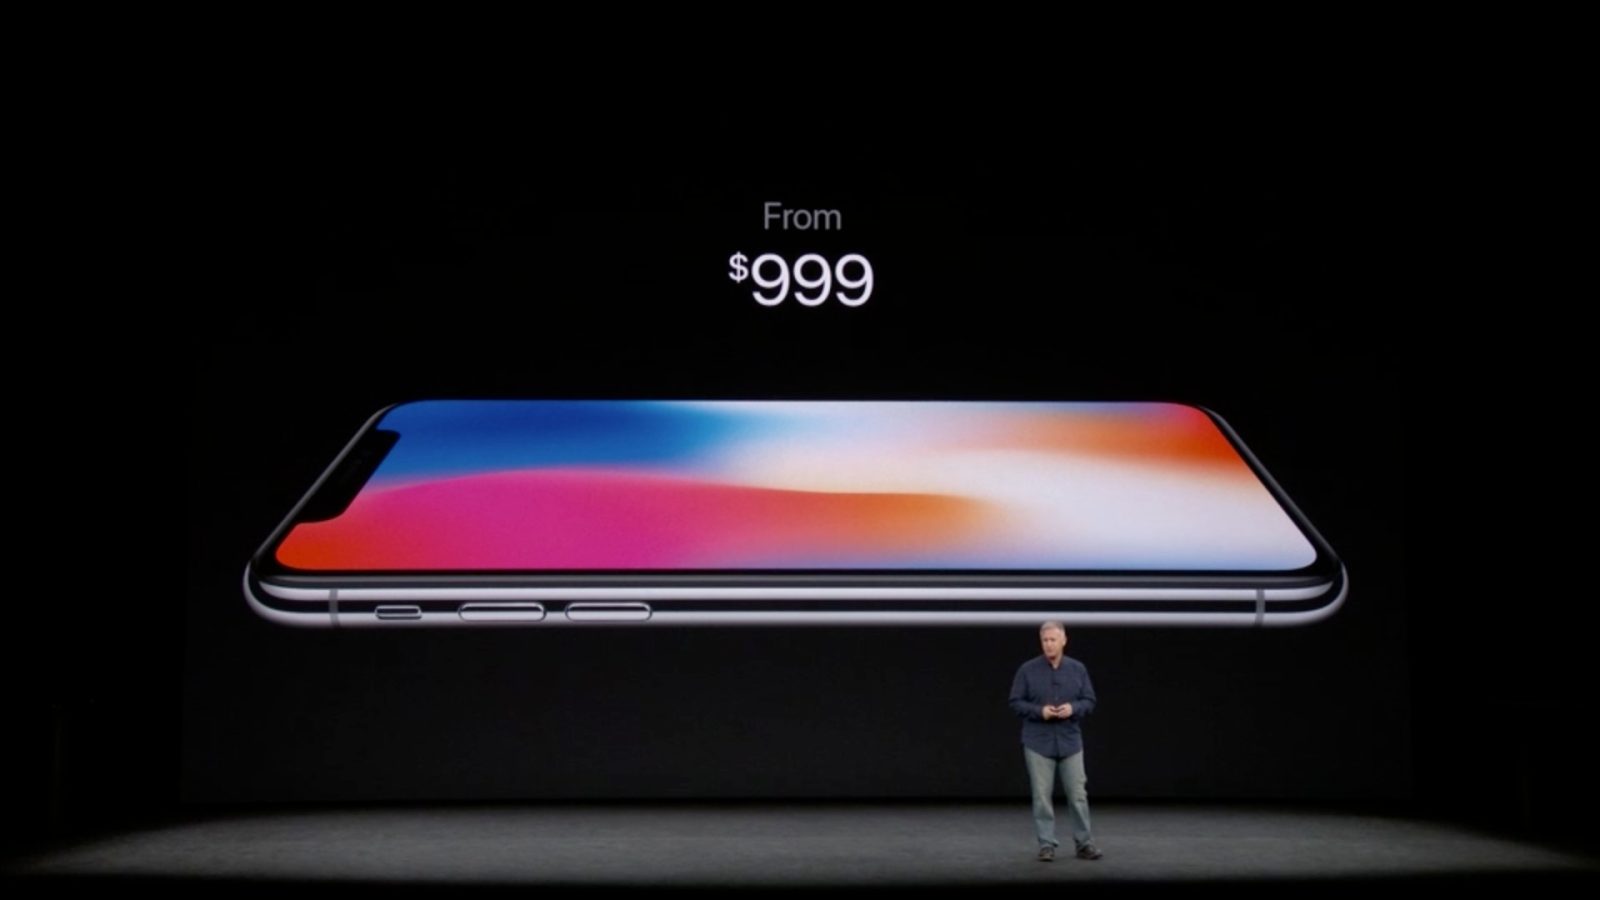 AppleCare+ prices jump with introduction of new iPhones - 9to5Mac